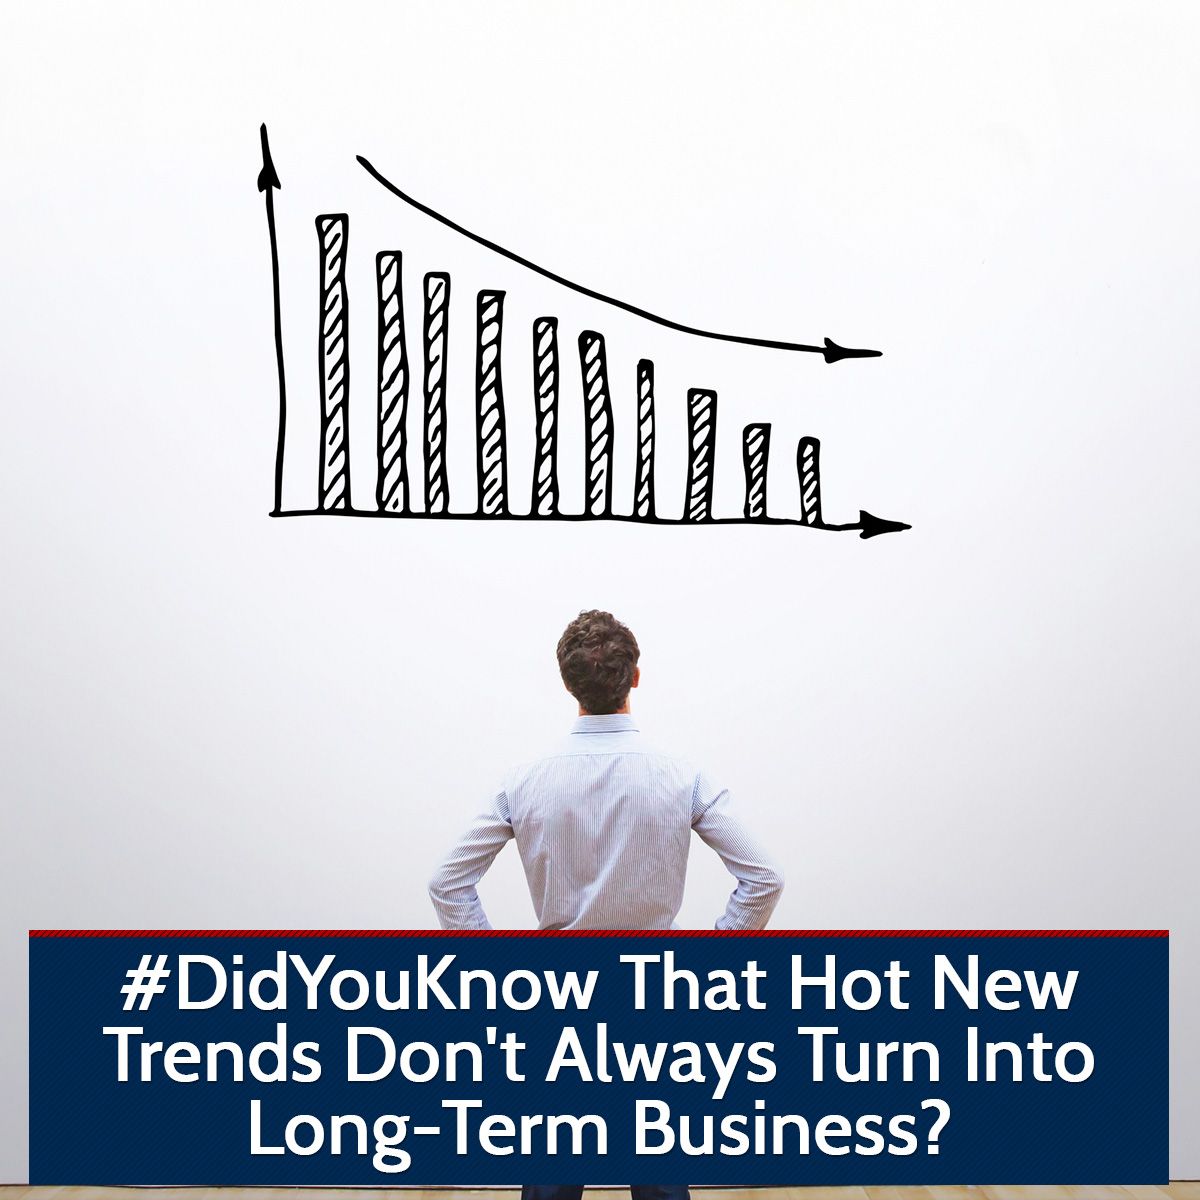 #Didyouknow That Hot New Trends Don't Always Turn Into Long-Term Business?